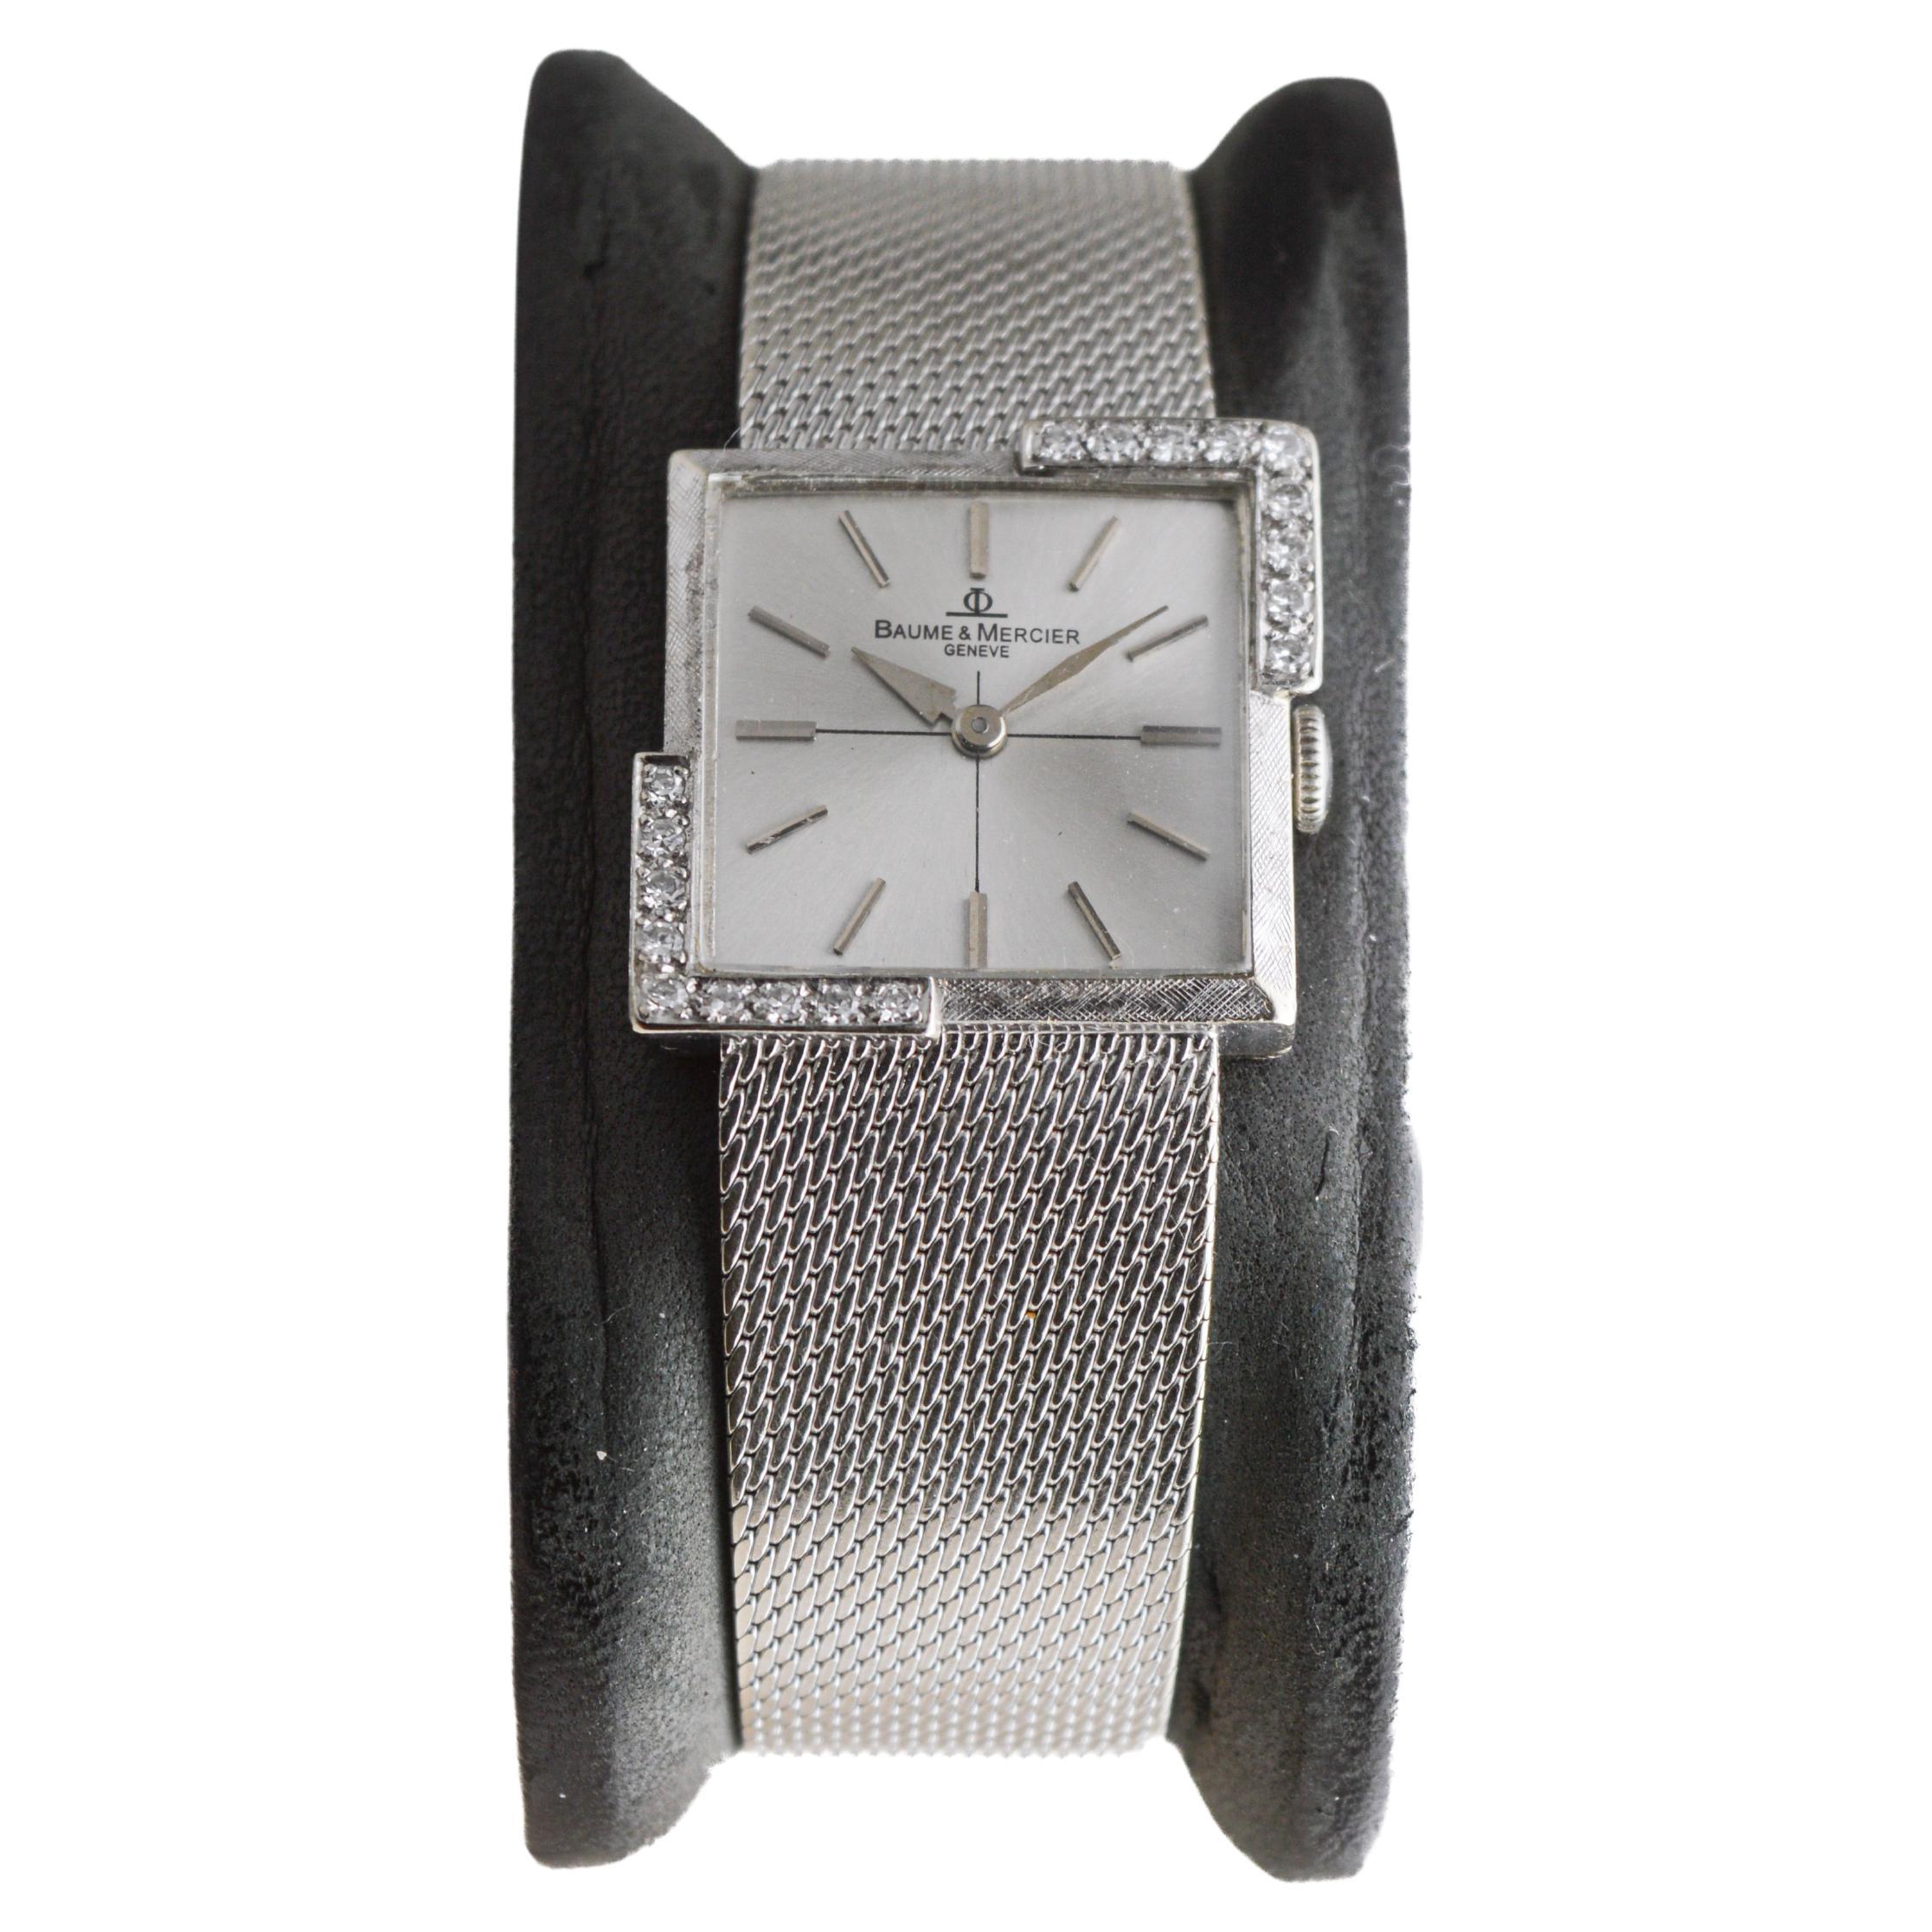 Baume Mercier 14Kt. Solid White Gold Bracelet Dress Watch with Diamond Accents In Excellent Condition For Sale In Long Beach, CA